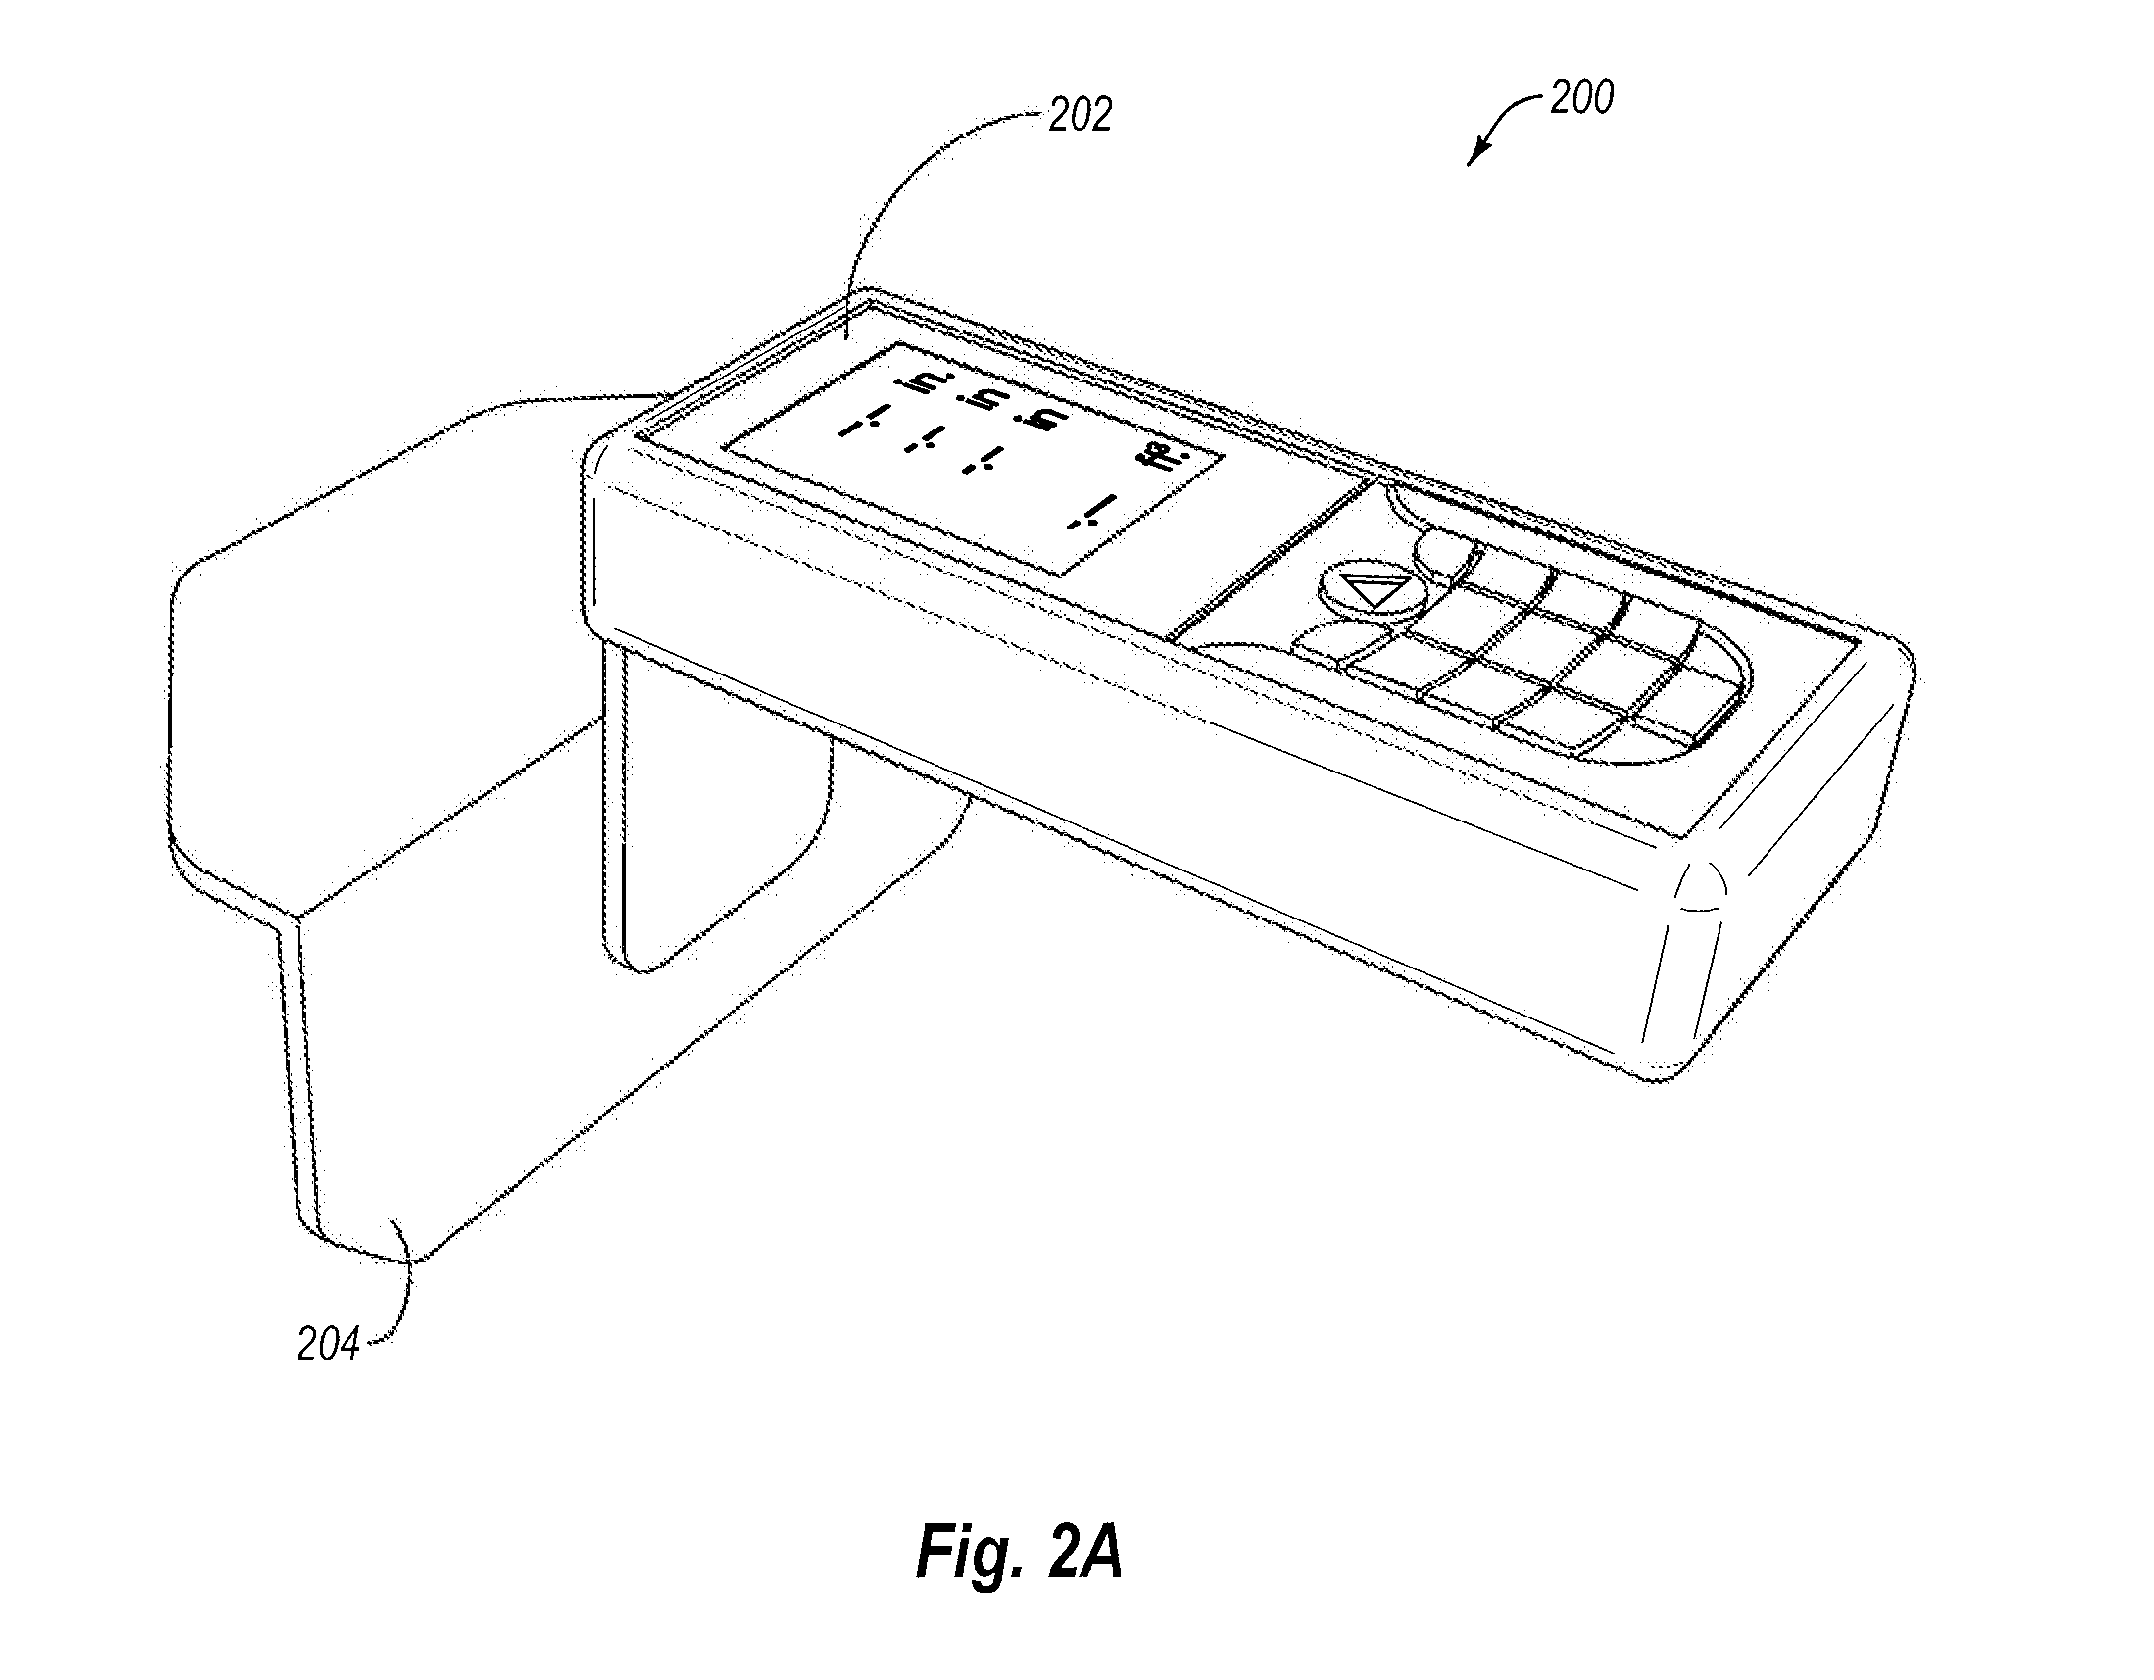 Apparatus, systems and methods for using handheld measurement devices to create on-demand packaging